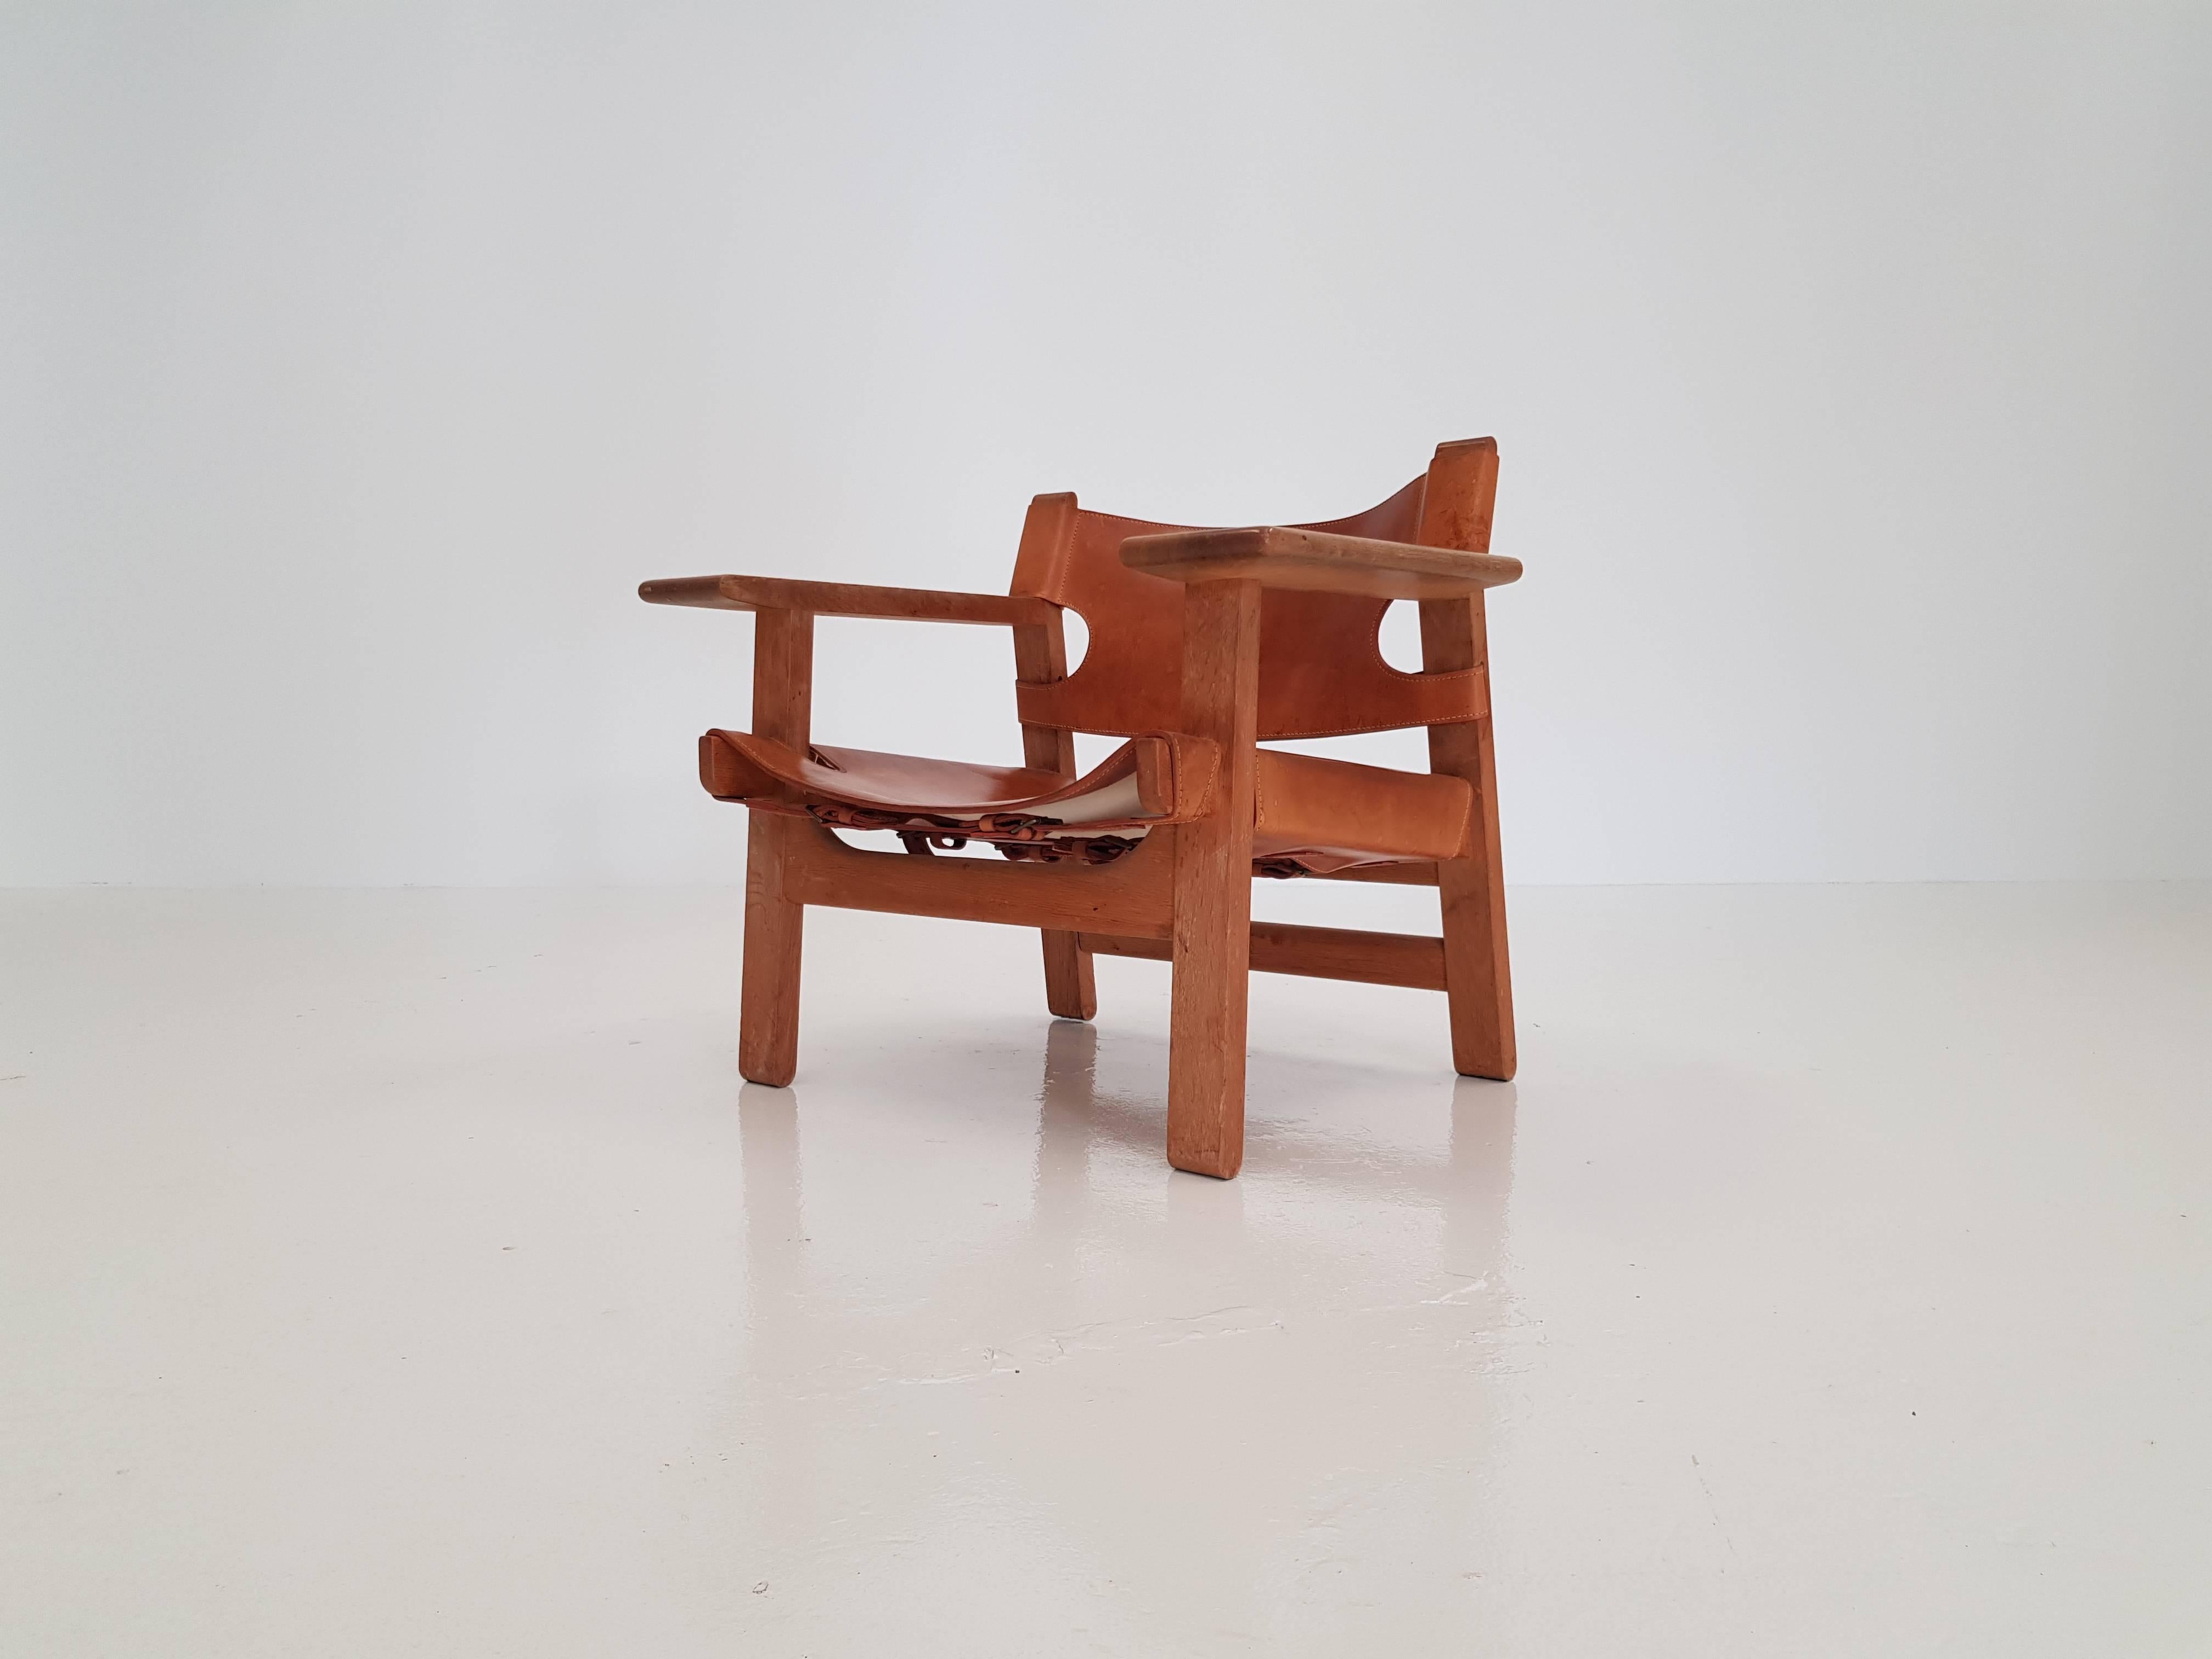 20th Century Børge Mogensen Spanish Chair, Designed 1958, Produced by Fredericia Stolefabrik